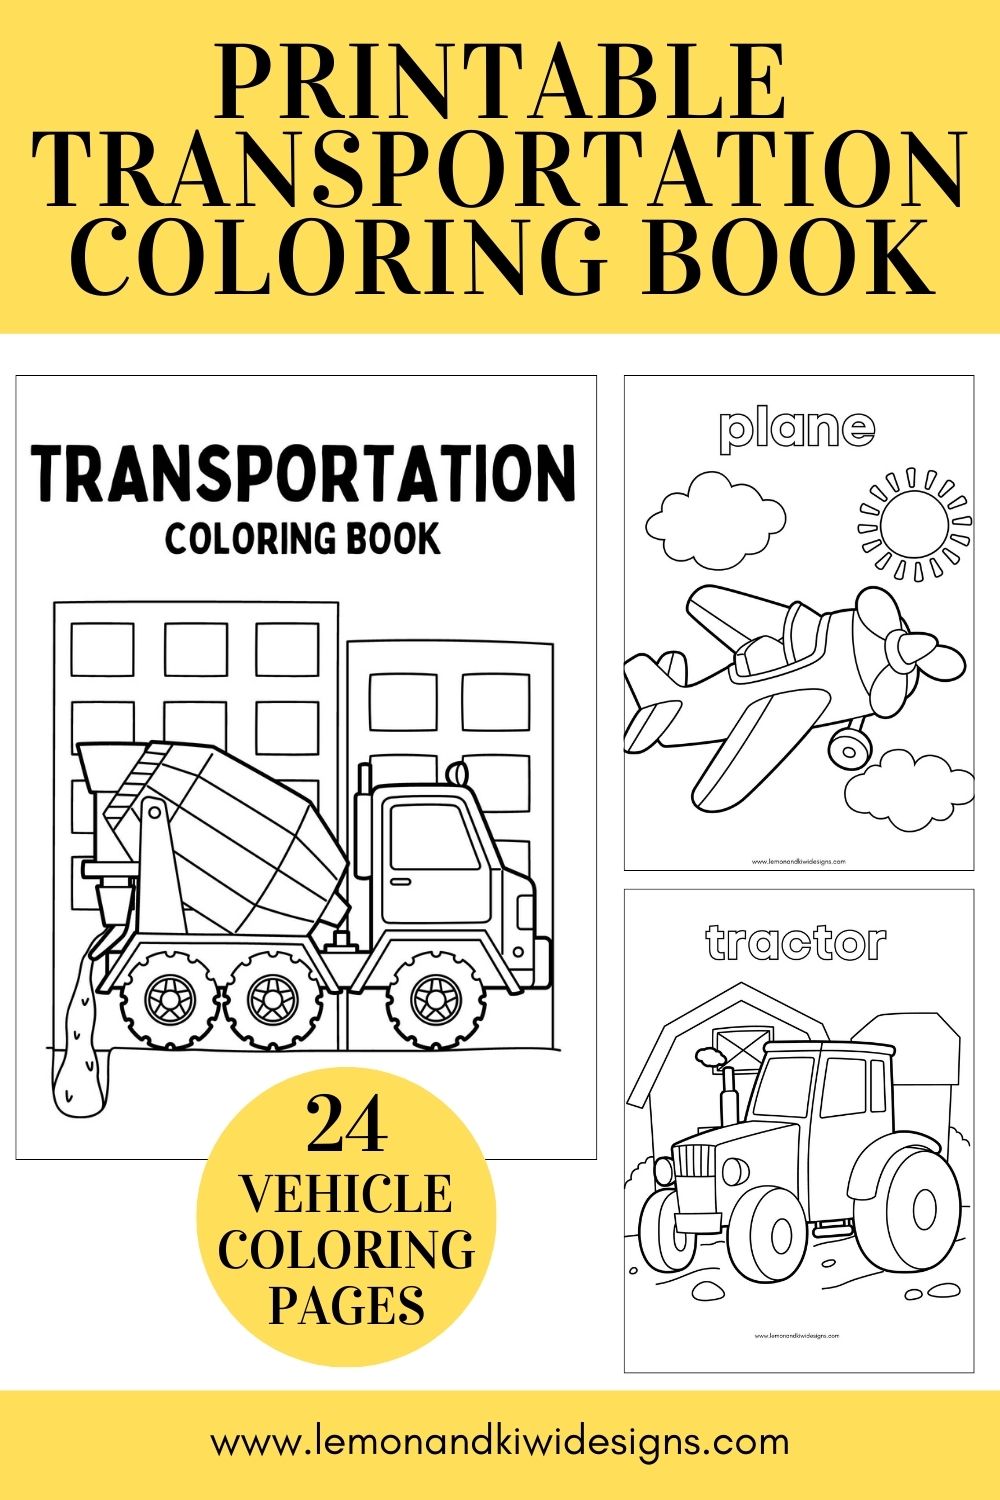 Printable Transportation Coloring Book (24 Vehicle Coloring Pages)